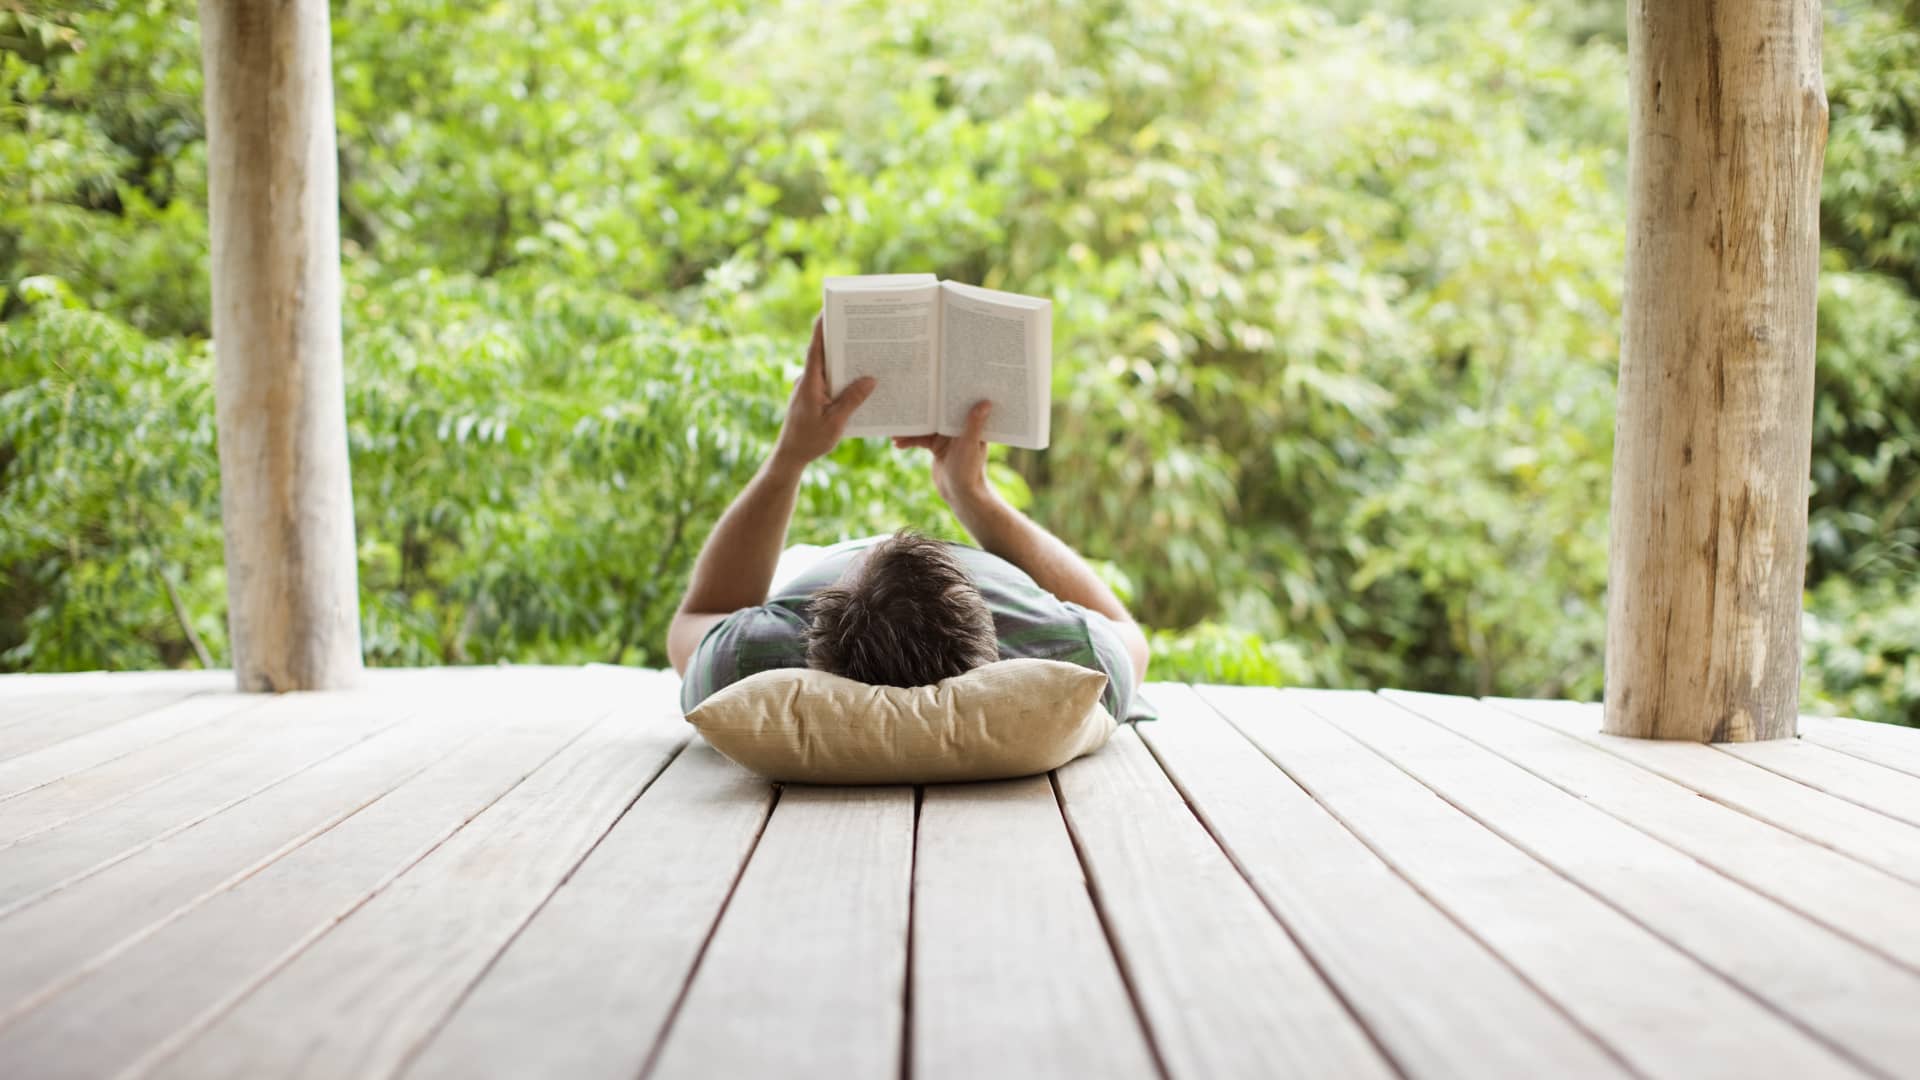 3 inspirational books everyone should read this summer, according to life coaches